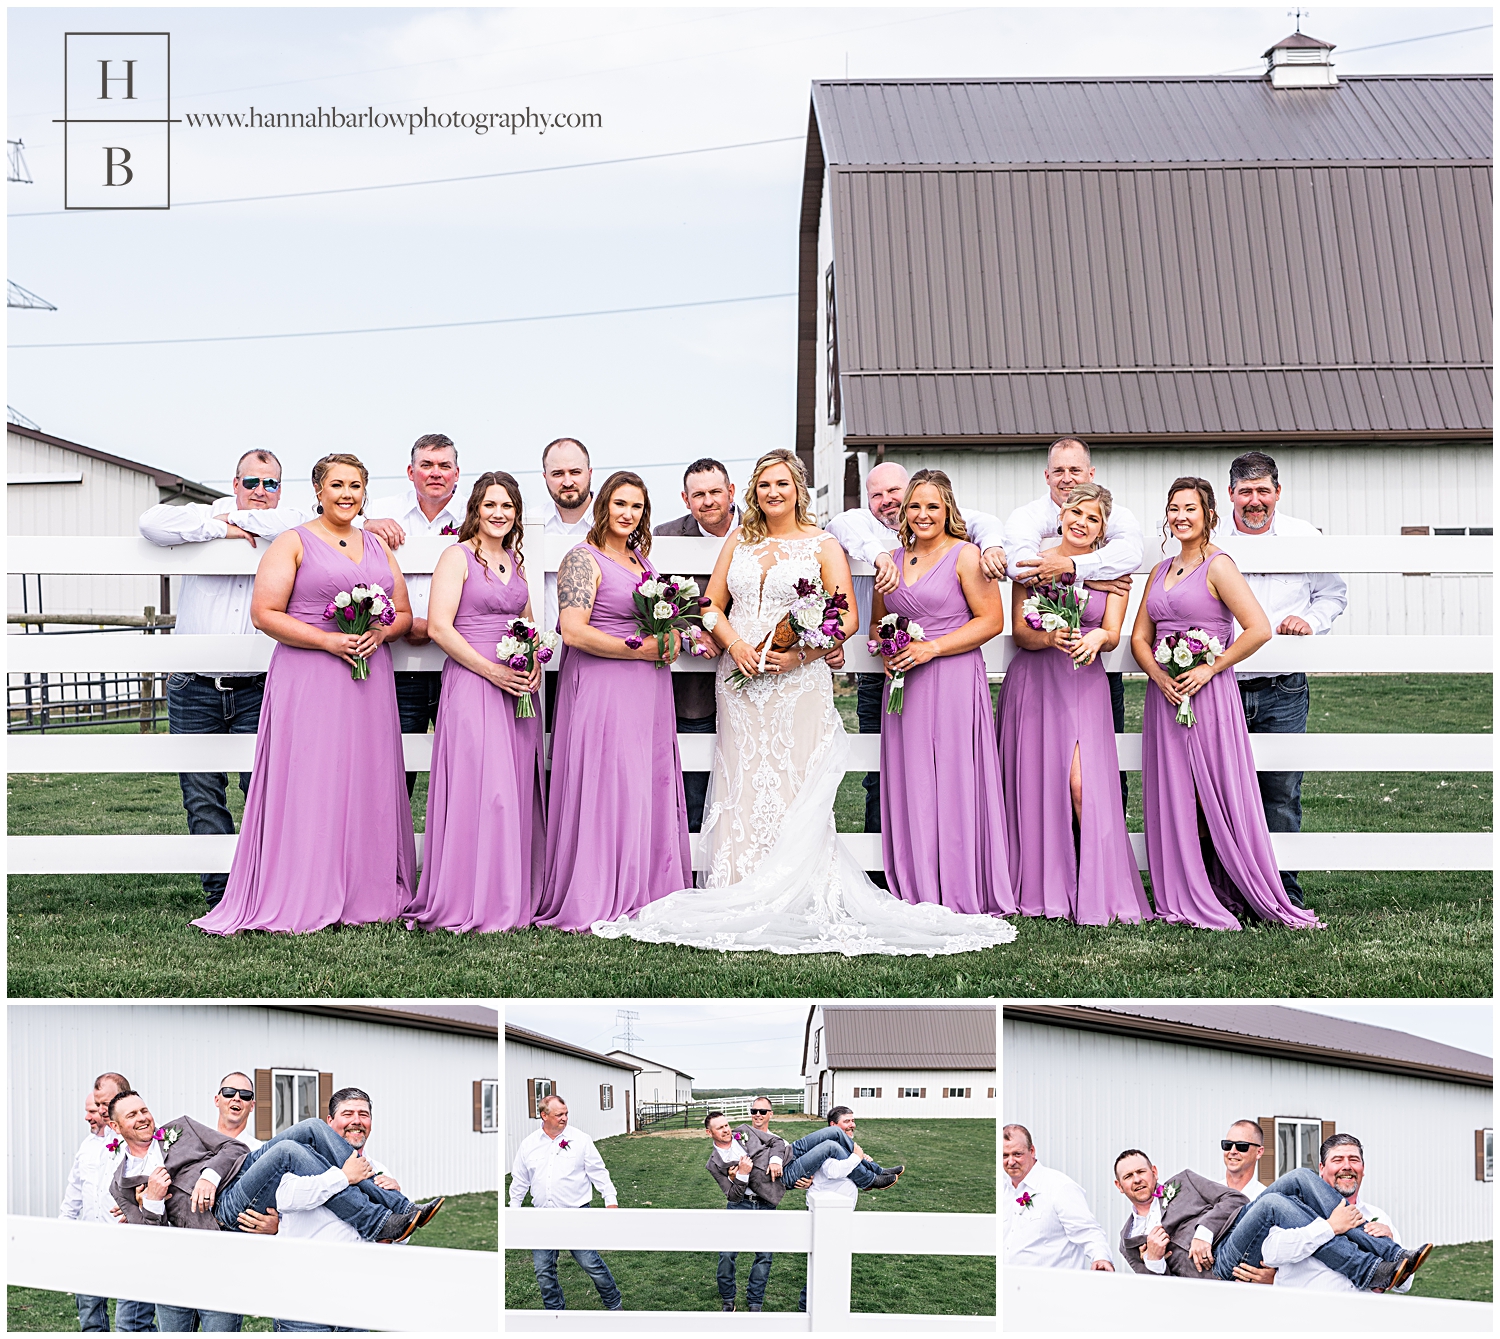 Men stand behind fence behind bridesmaids for bridal party portrait.